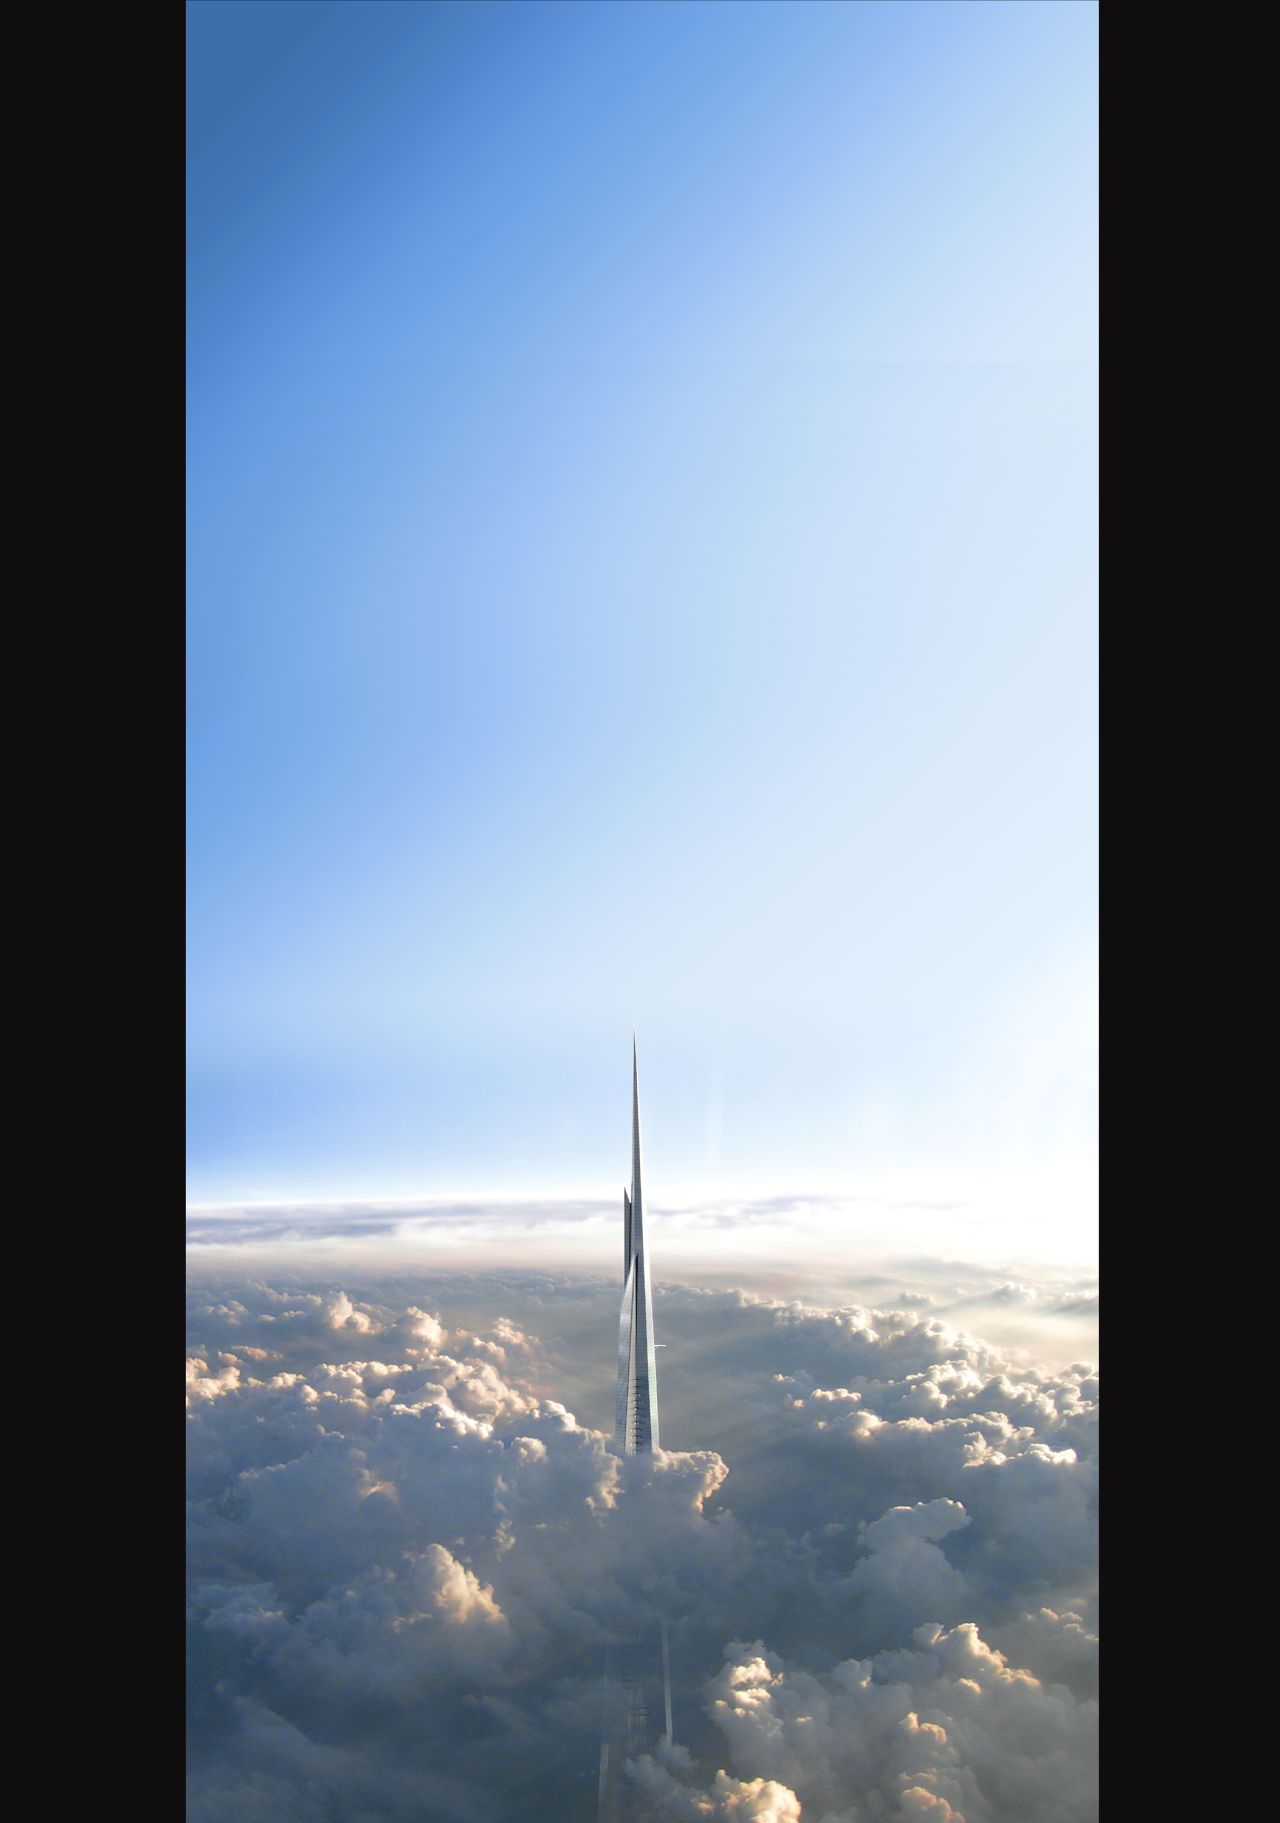 Saudi Arabia's Jeddah Tower, scheduled for completion in 2020, will rise 1-kilometer to the sky. 